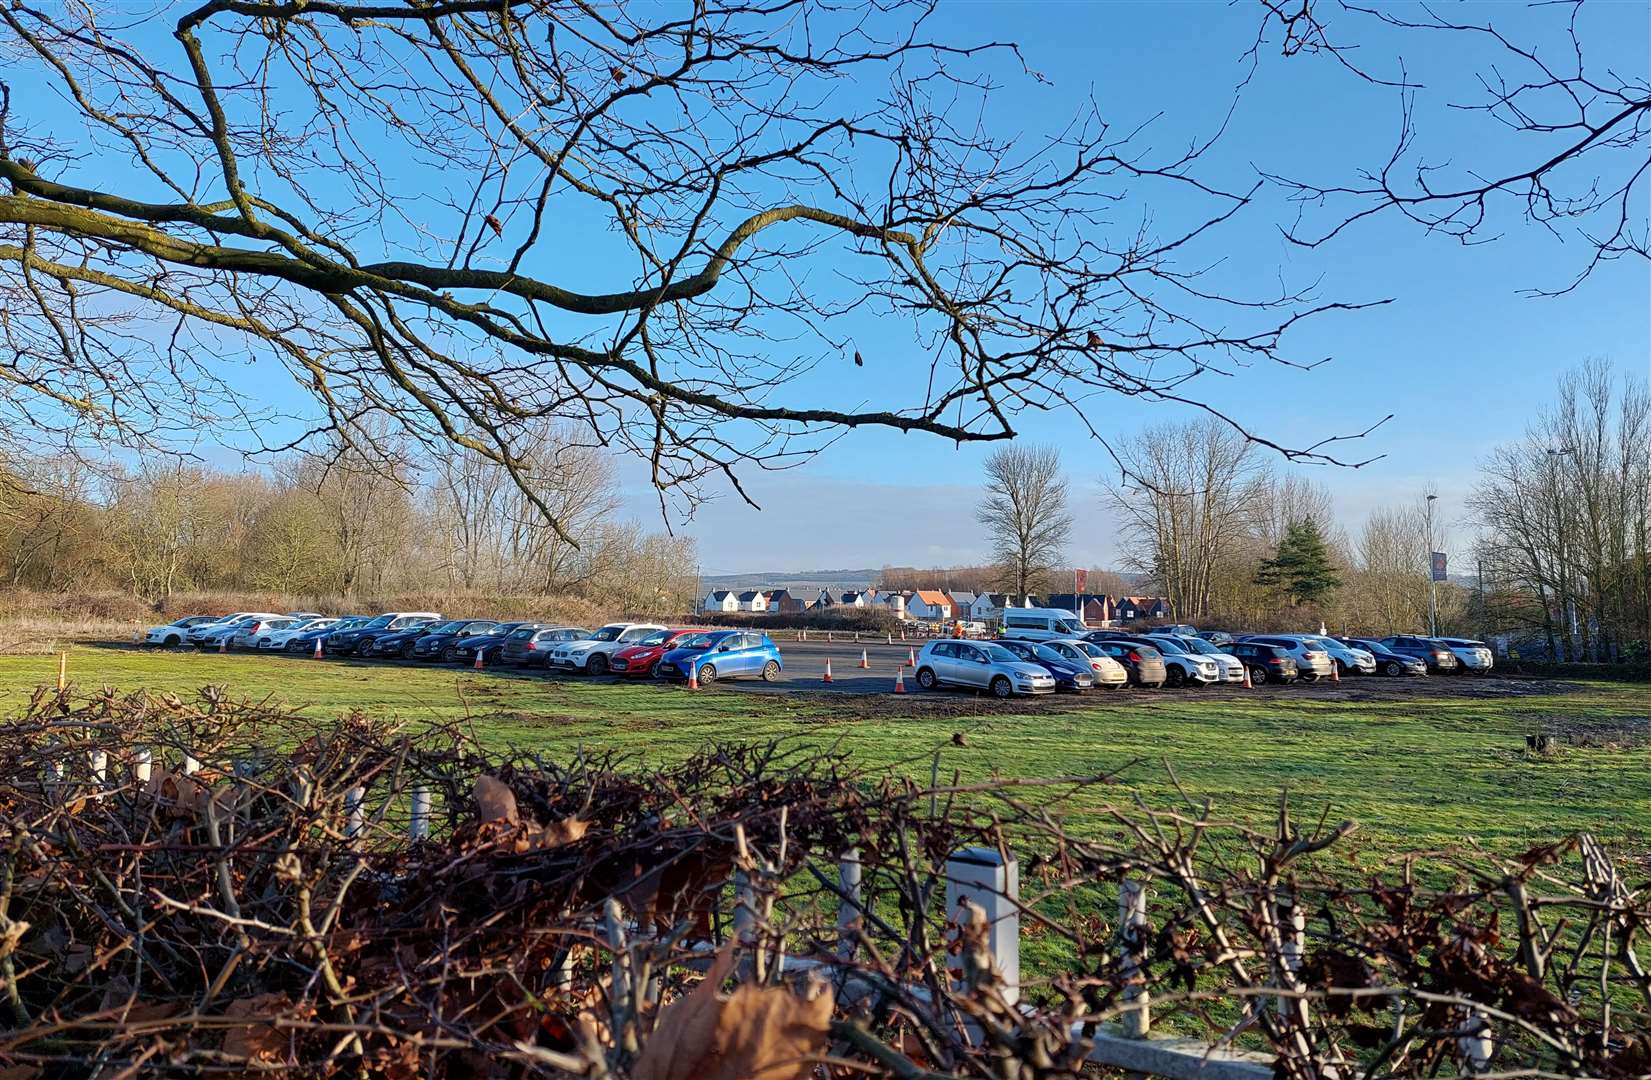 The car park is usually used when large events are held at the Julie Rose Stadium